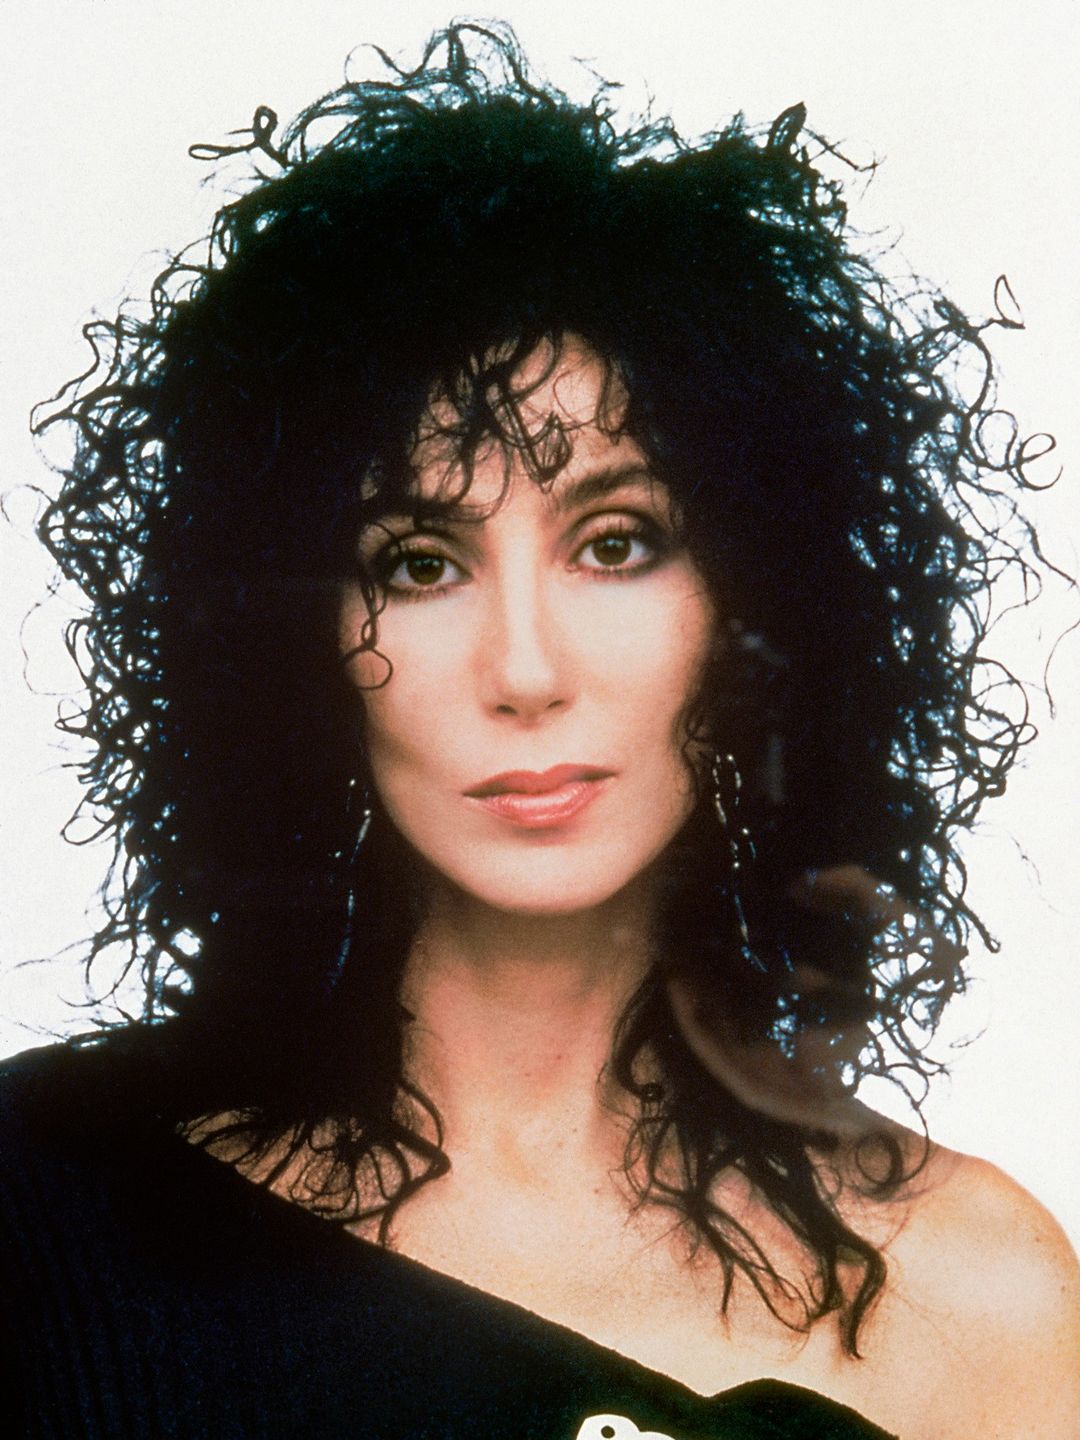 Cher dating history